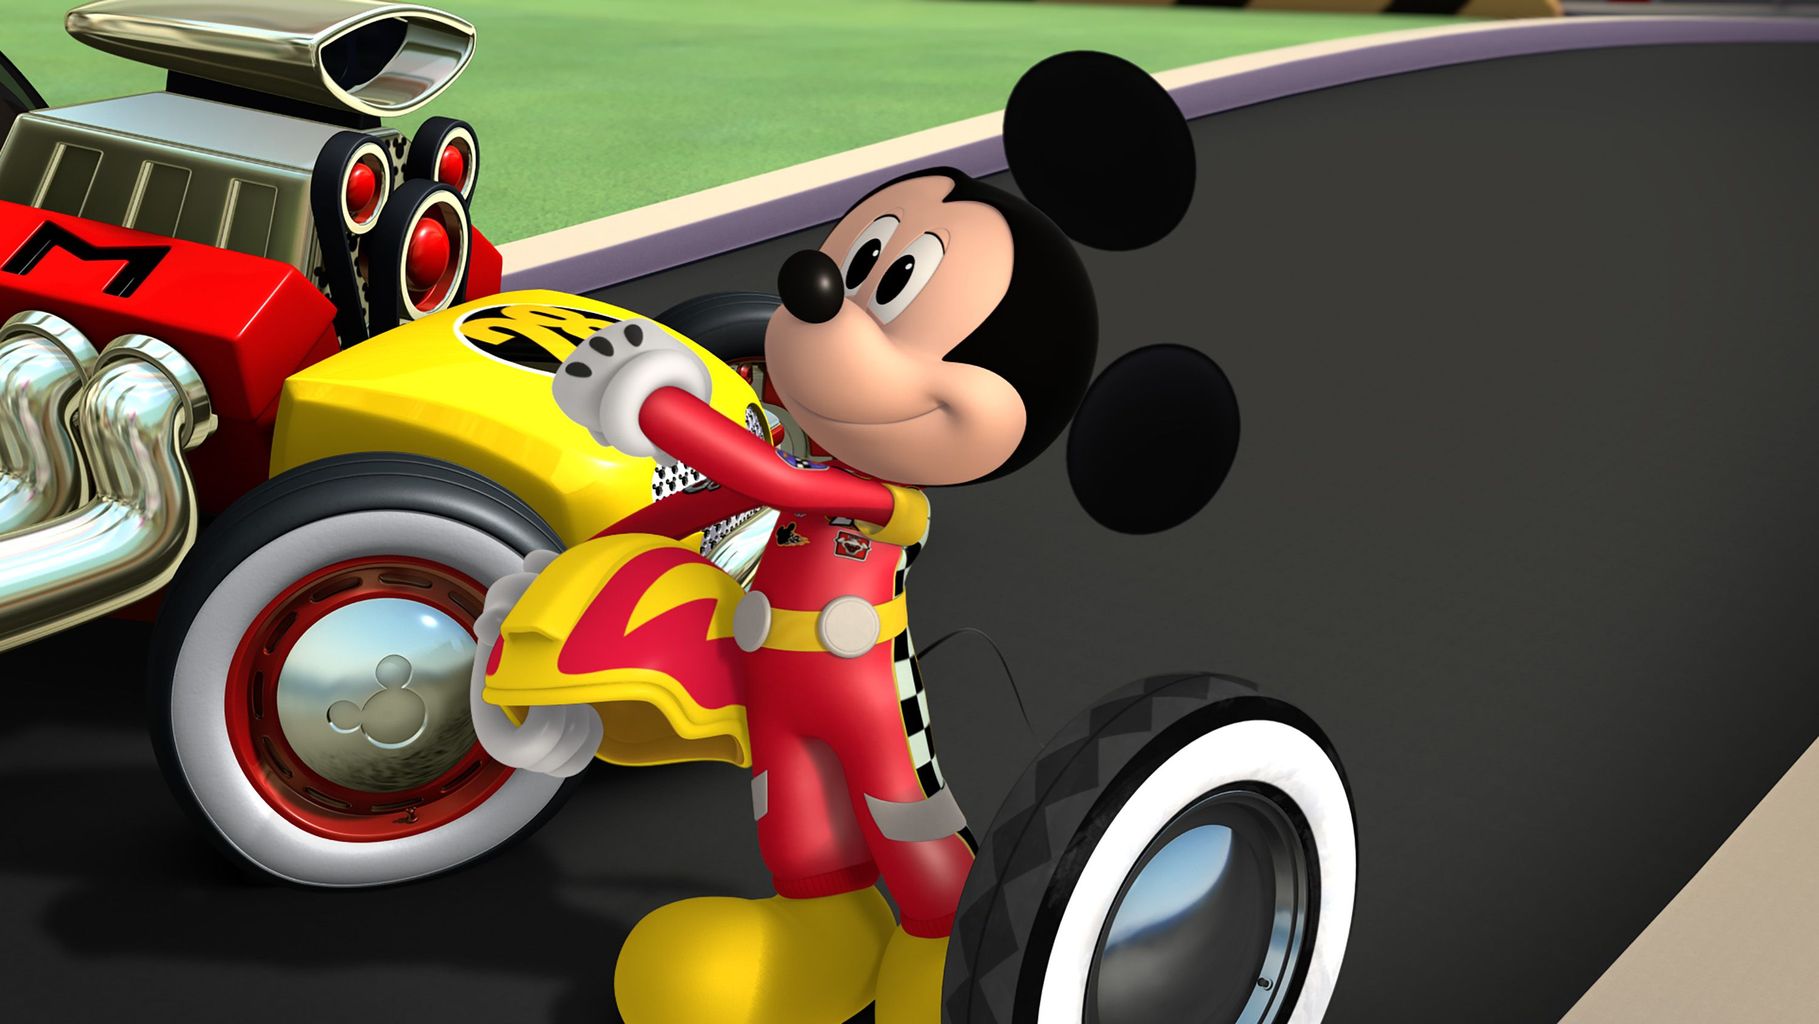 mickey-and-the-roadster-racers-tv-show-on-disney-junior-season-2